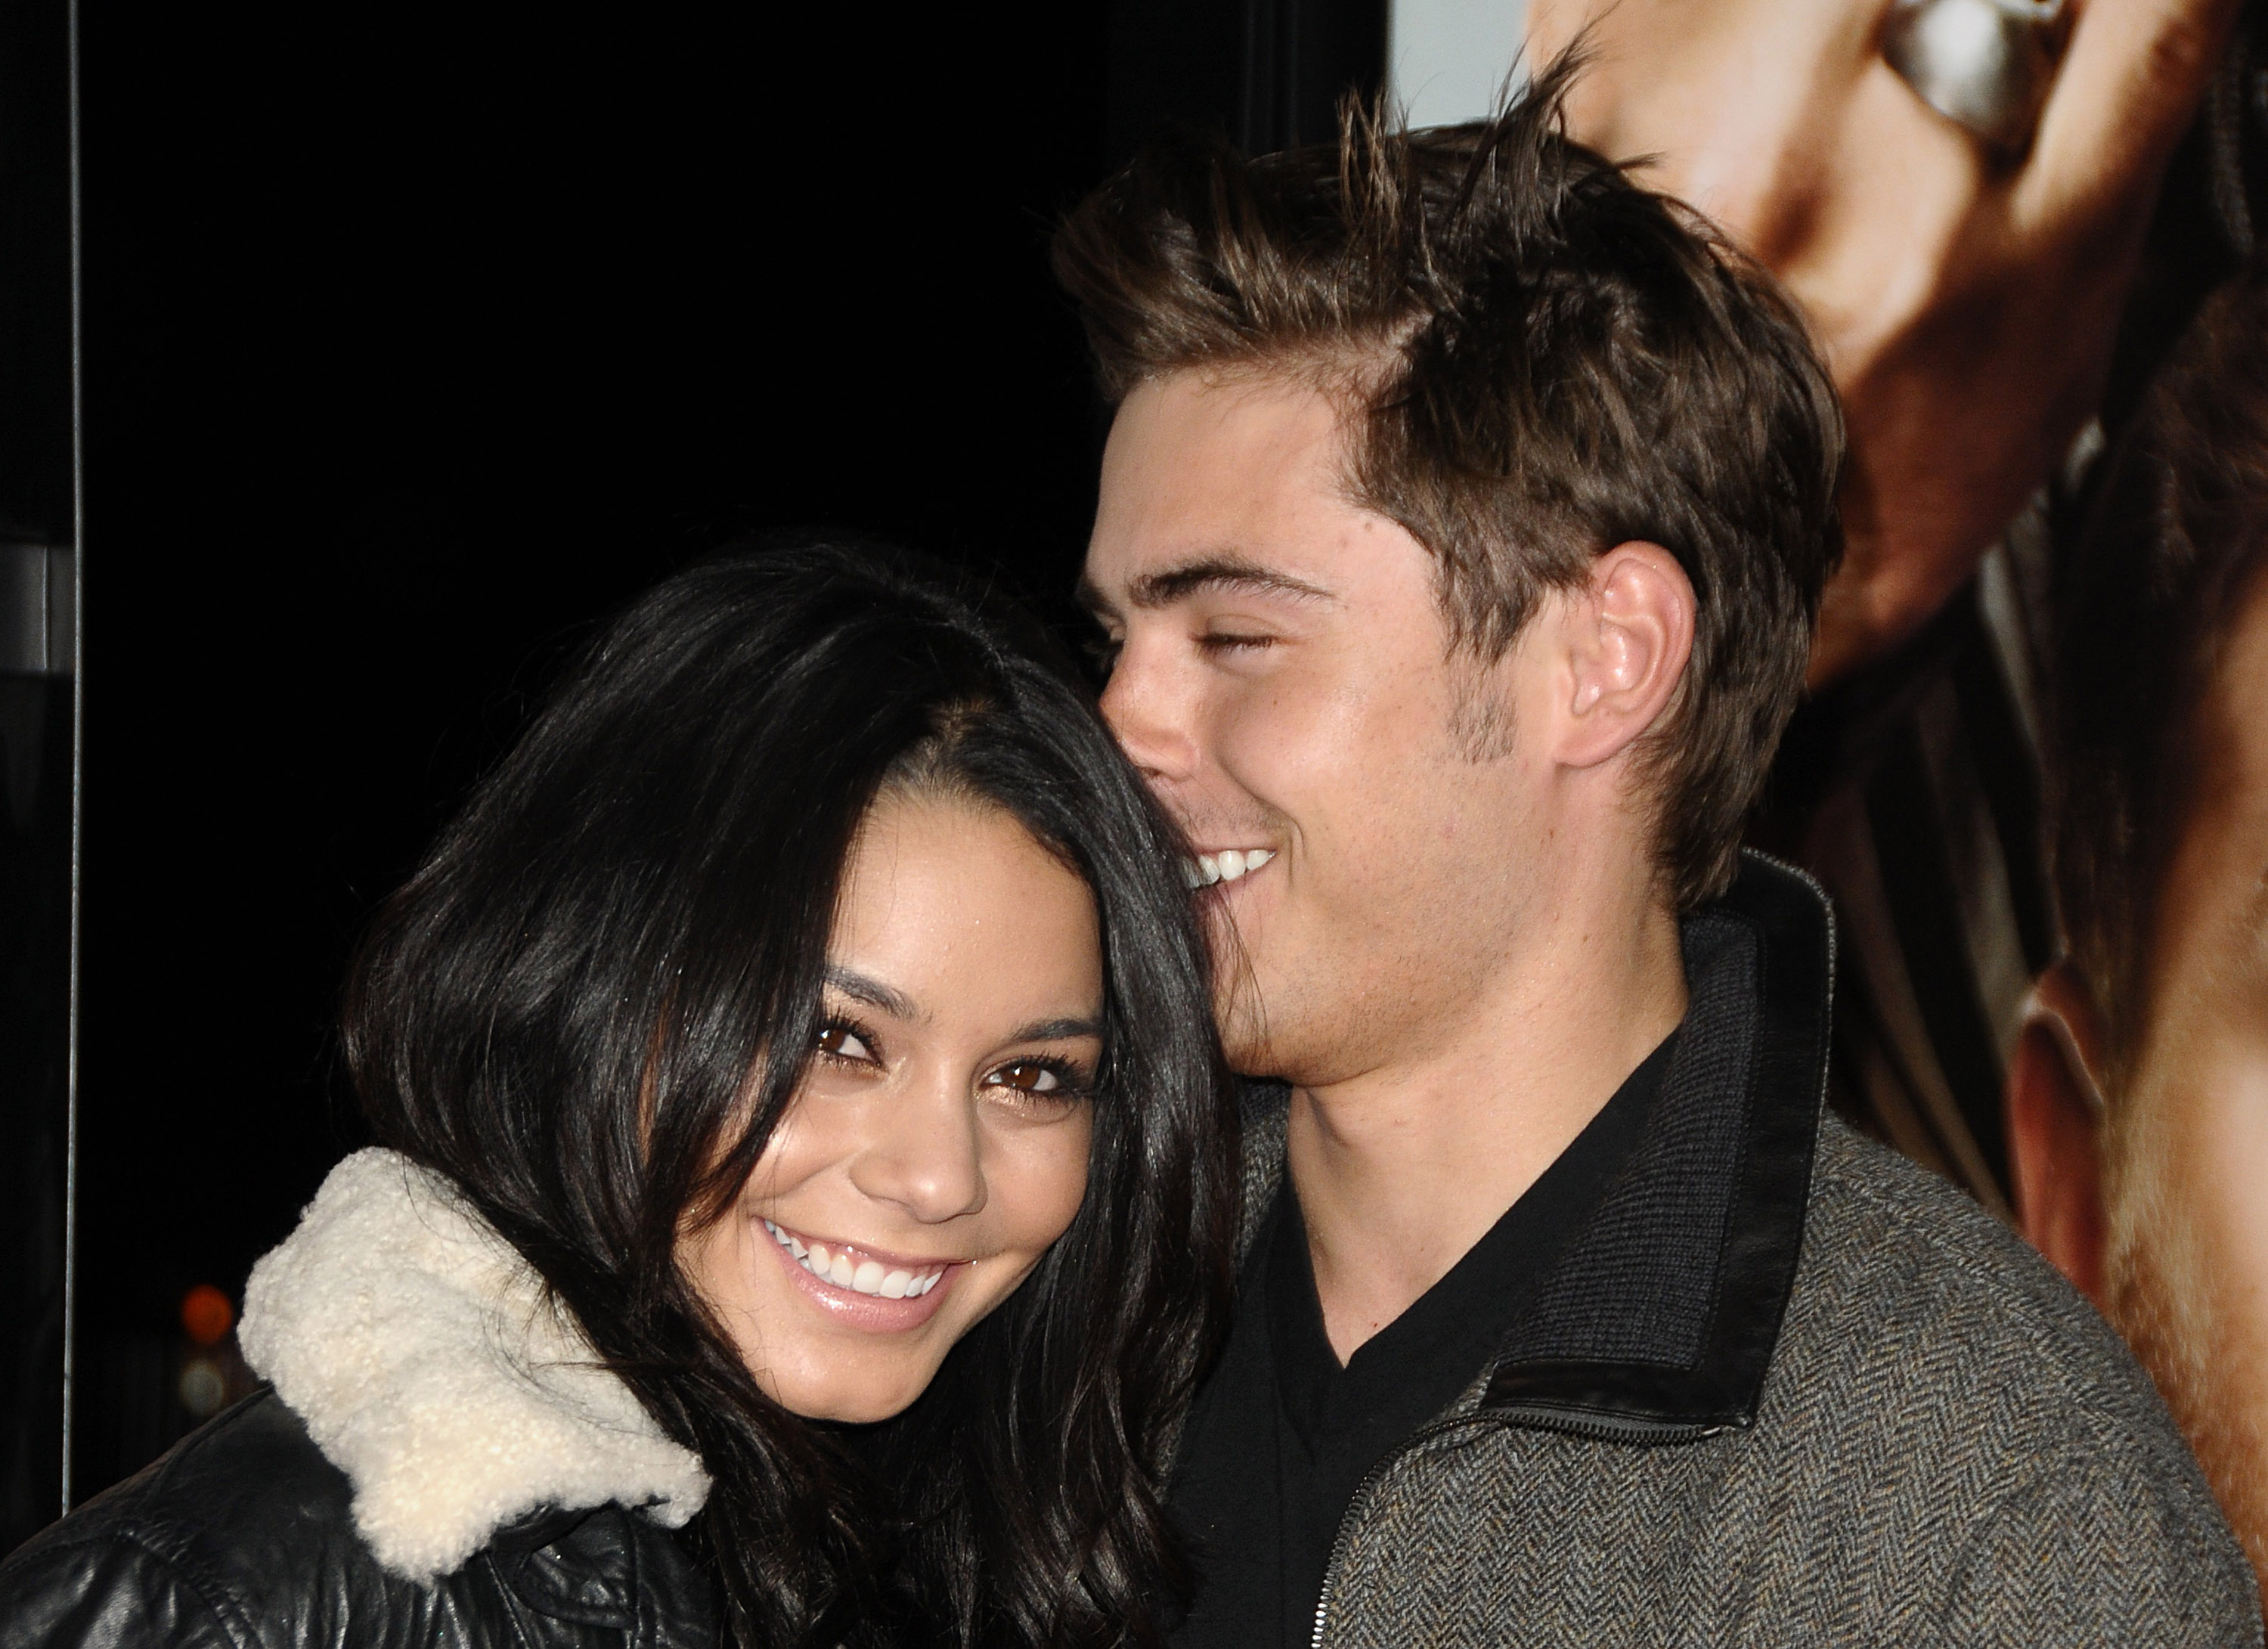 Vanessa Hudgens and Zac Efron attend the premiere of "Get Him To The Greek" at The Greek Theatre on May 25, 2010, in Los Angeles, California. | Source: Getty Images